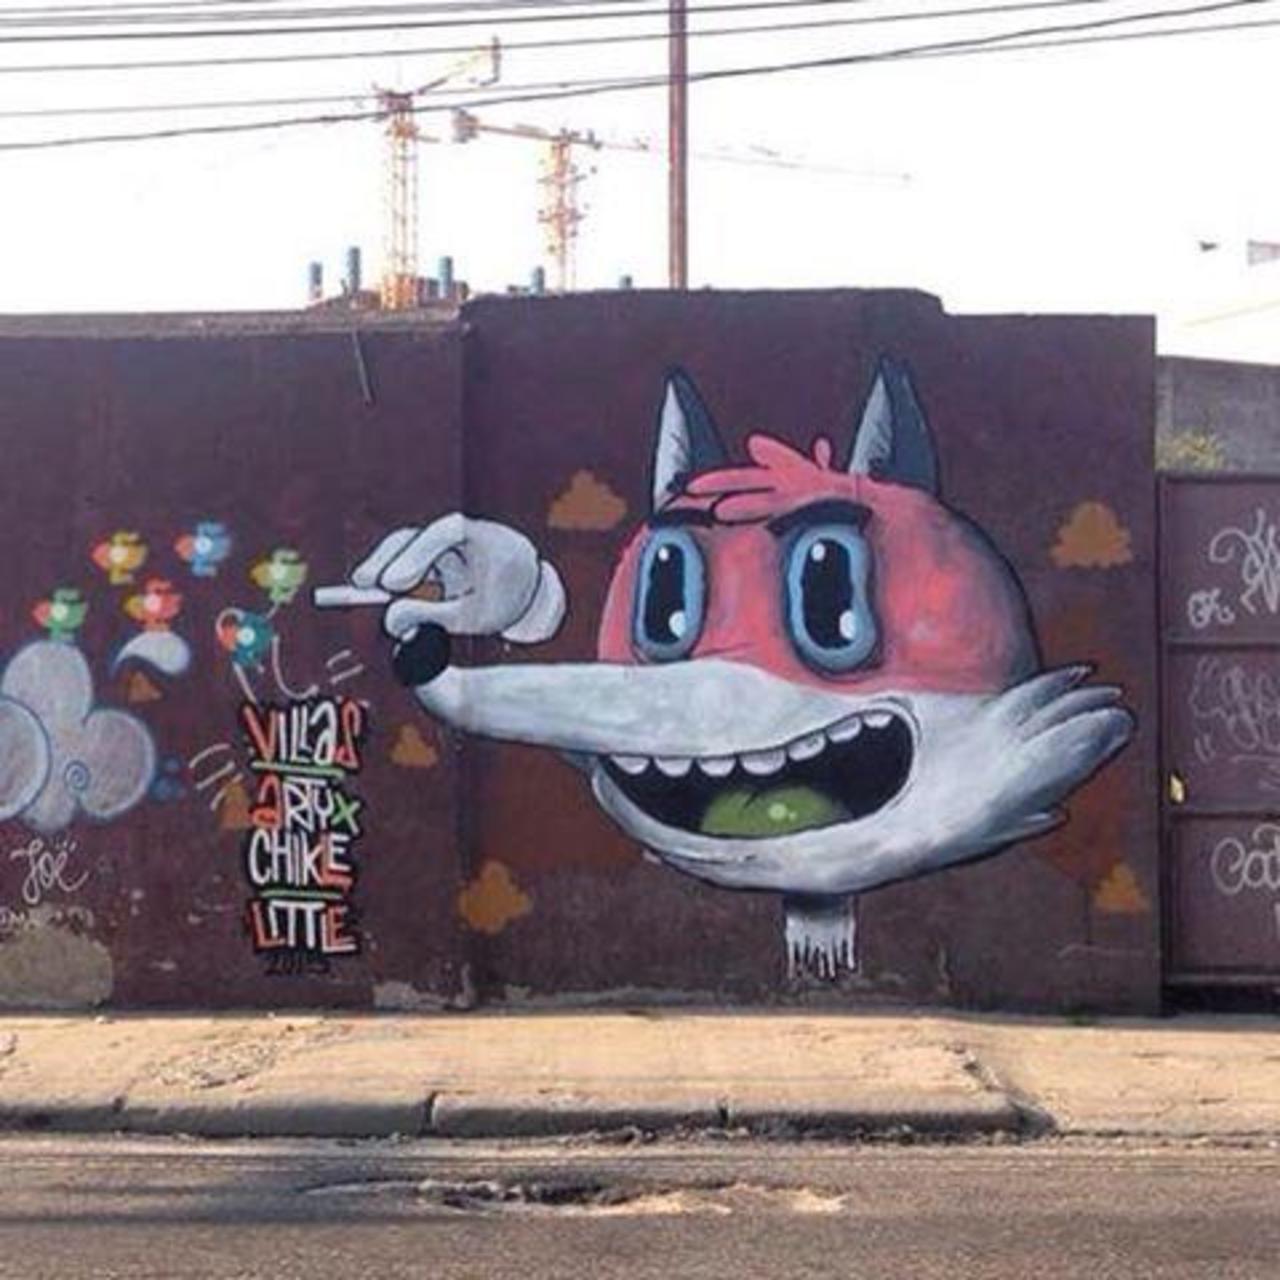 Arty and Chikle! - Rio de Janeiro, Brasil #artyandchikle #riodejaneiro #brasil #graffiti #streetart @arty_and_chikle http://t.co/GrcVcn99TE